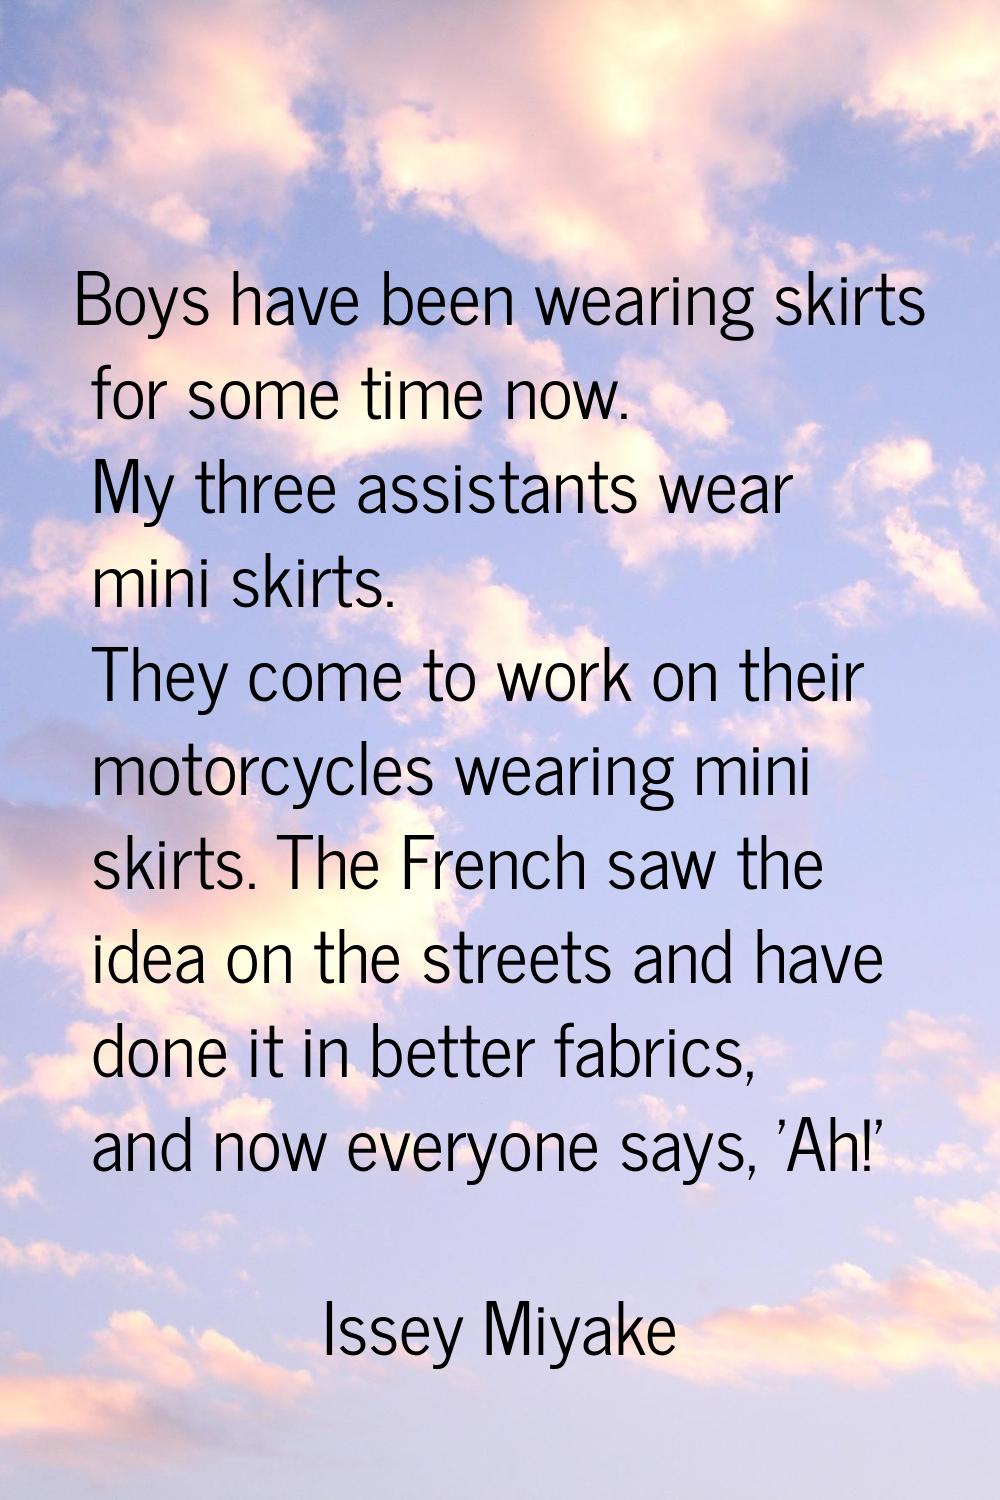 Boys have been wearing skirts for some time now. My three assistants wear mini skirts. They come to